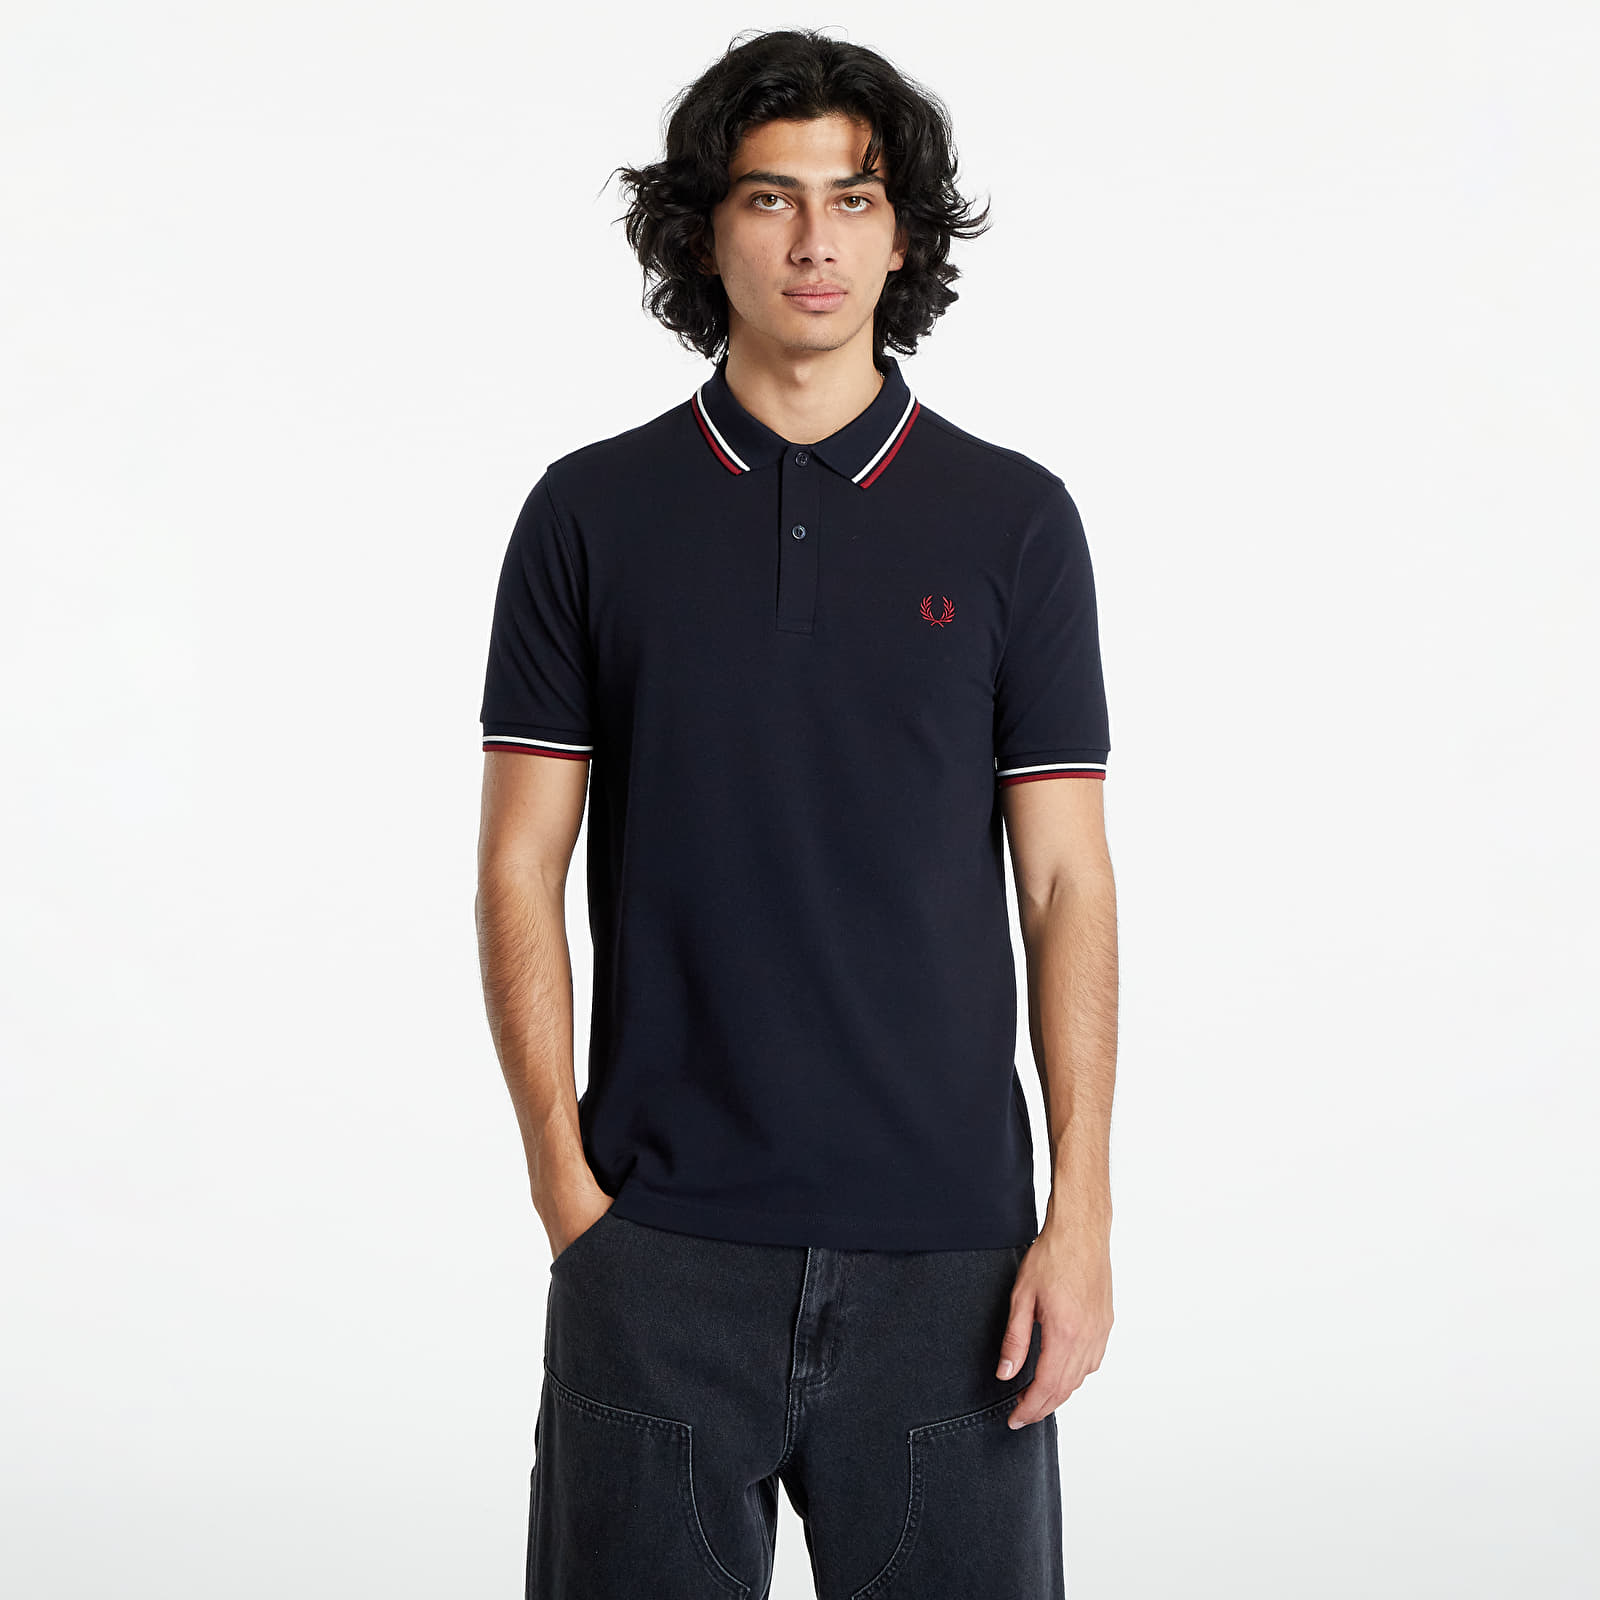 Тениски FRED PERRY Twin Tipped Fred Perry Shirt Nvy/ Swht/ Bntred